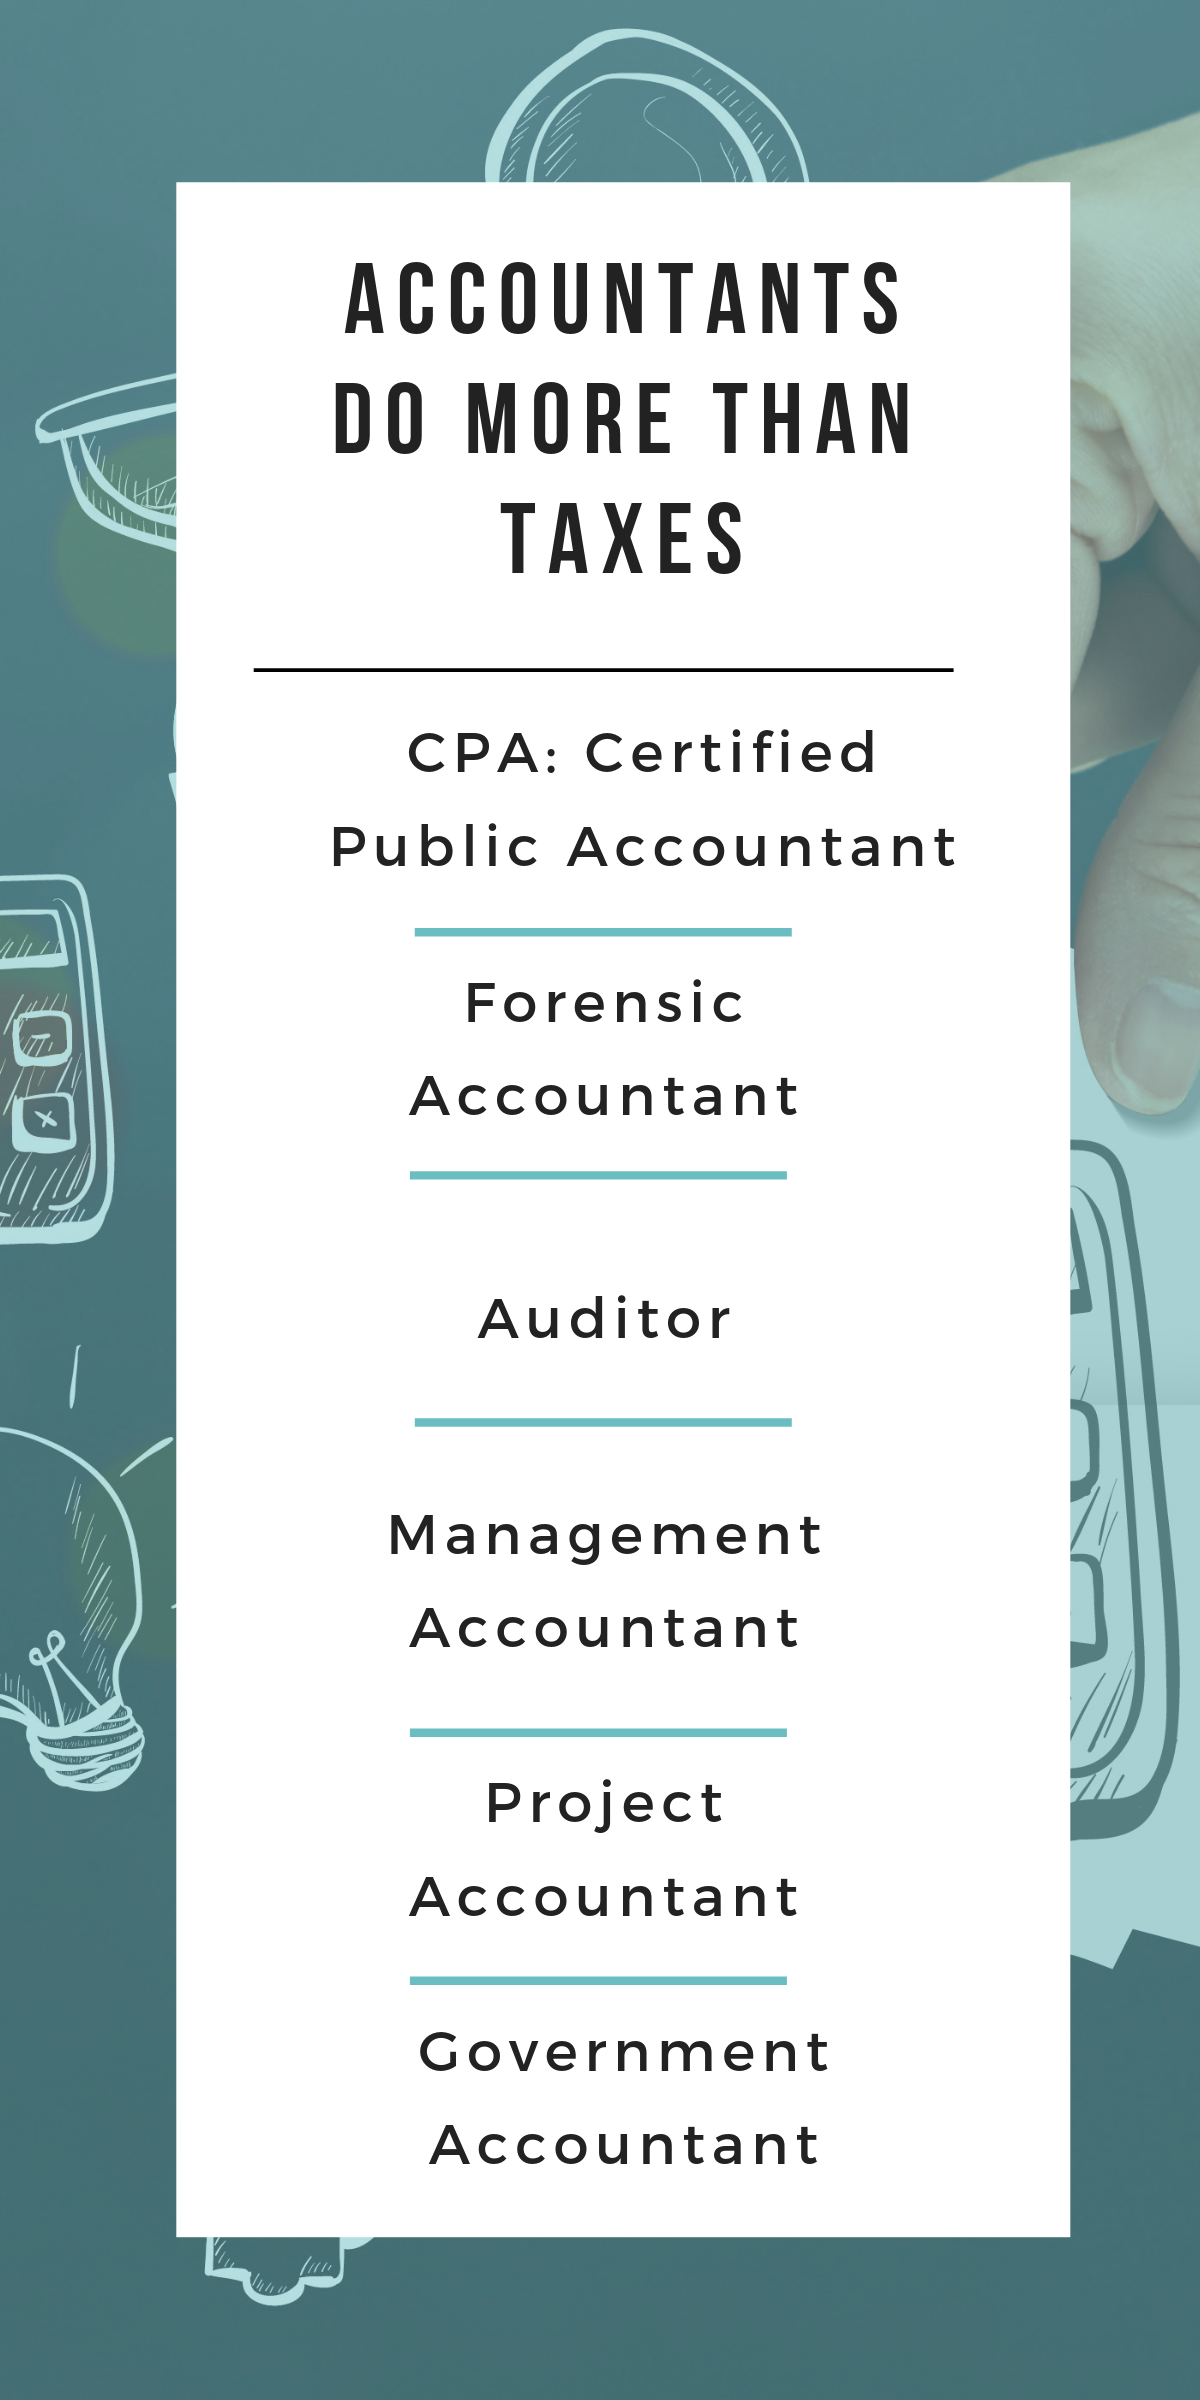 Accountants do more than taxes. CPA: Certified Public Accountant, Forensic Accountant, Auditor, Management Accountant, Project Accountant, Government Accountant